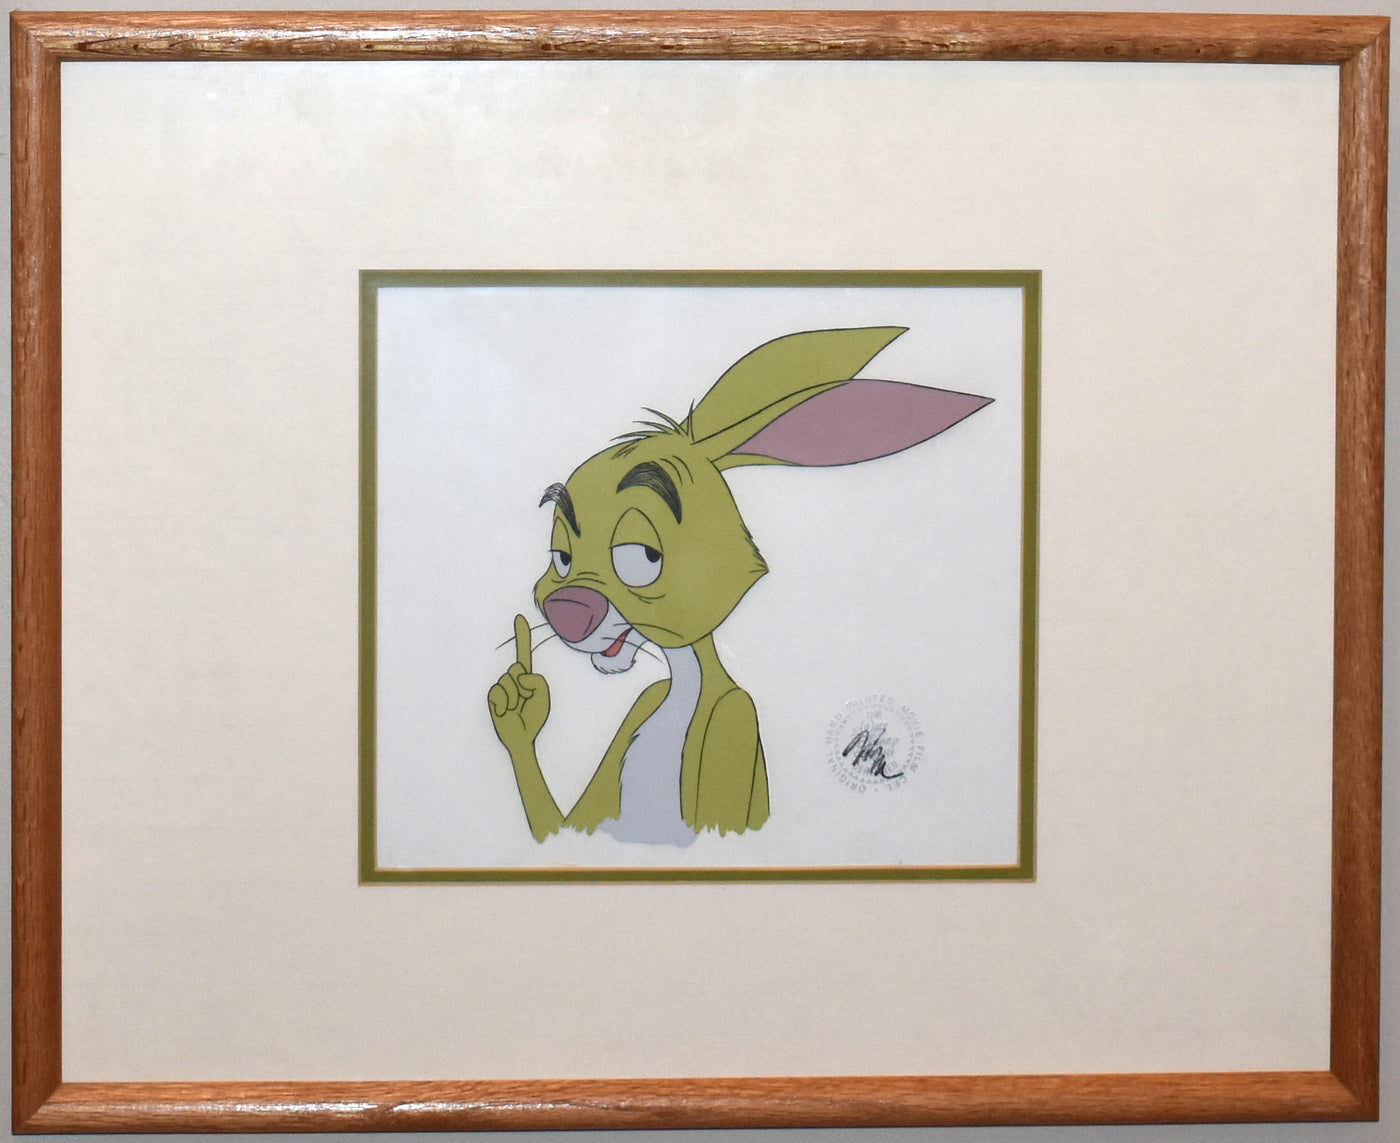 Original Walt Disney Production Cel from Winnie the Pooh and A Day for Eeyore featuring Rabbit and Eeyore